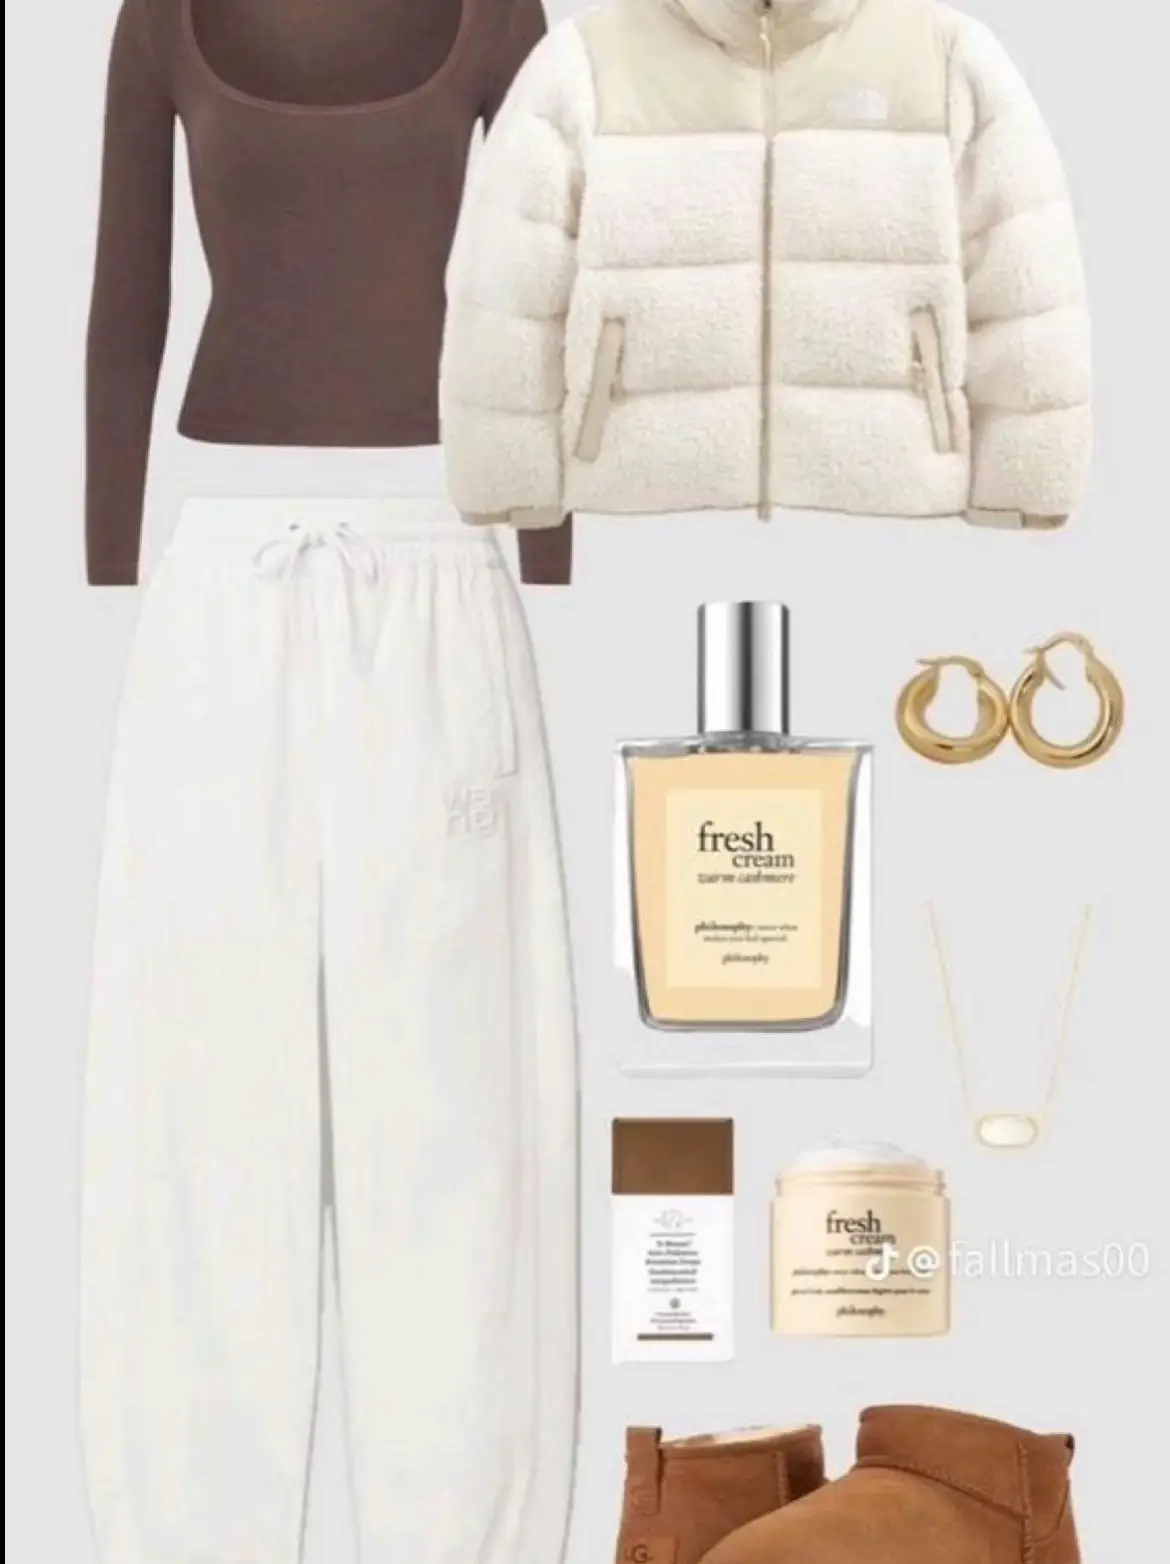 Winter wardrobe essentials ❄️ #outfitideas #winteroutfit #trendyoutfit